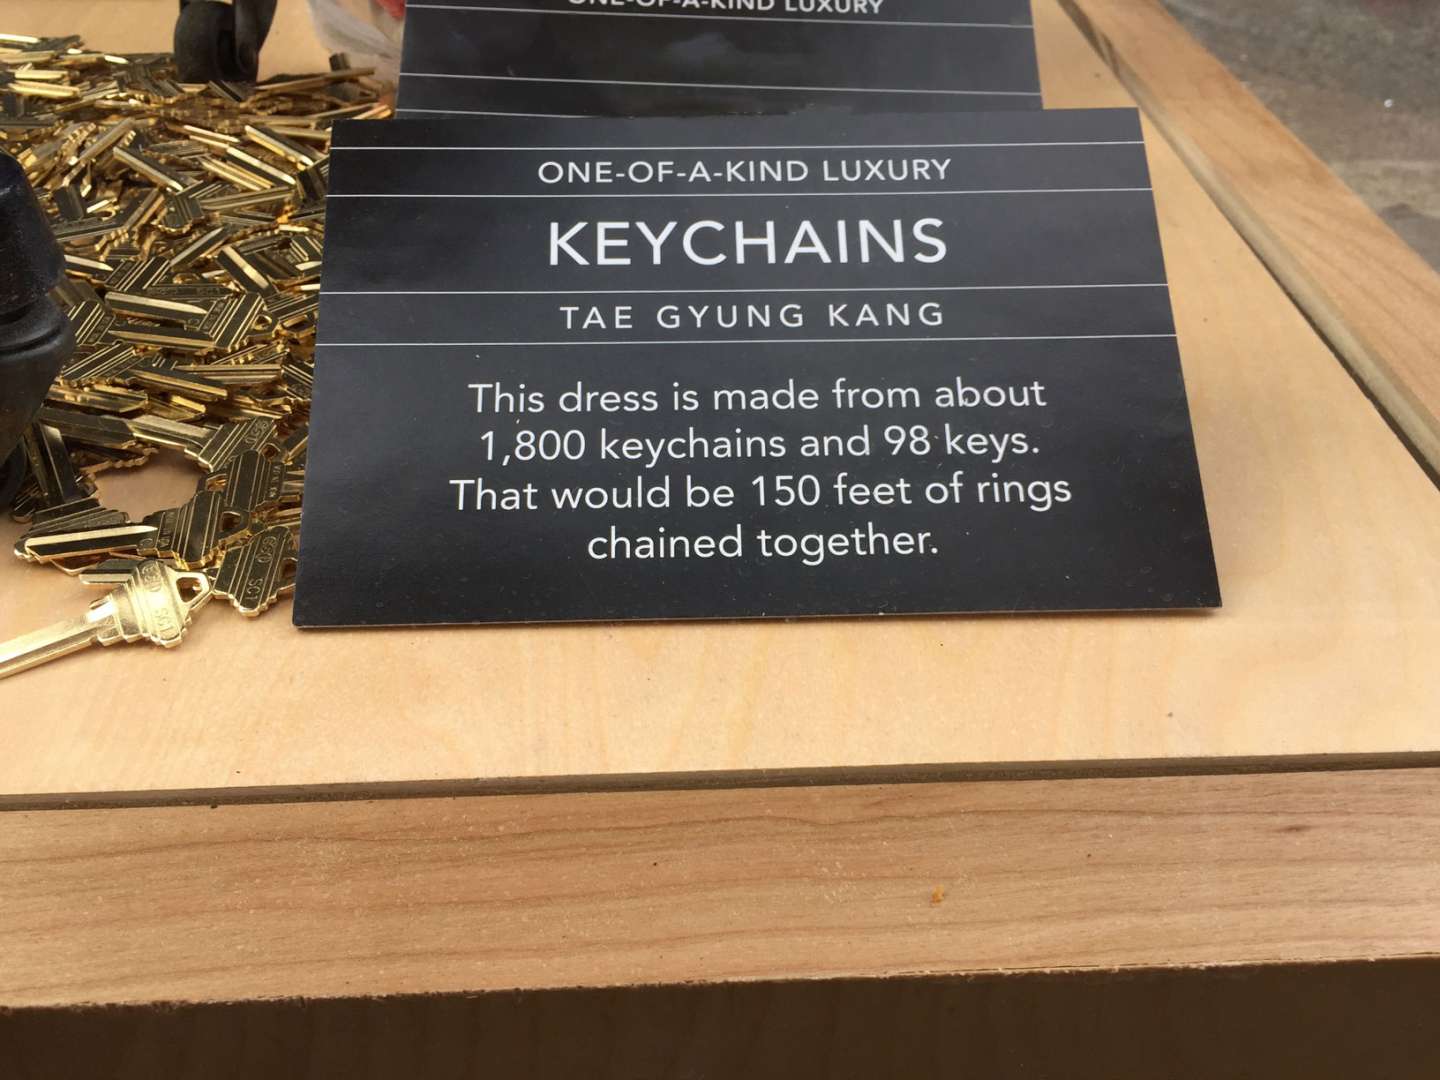 ONE-OF-A-KIND LUXURY: KEYCHAINS